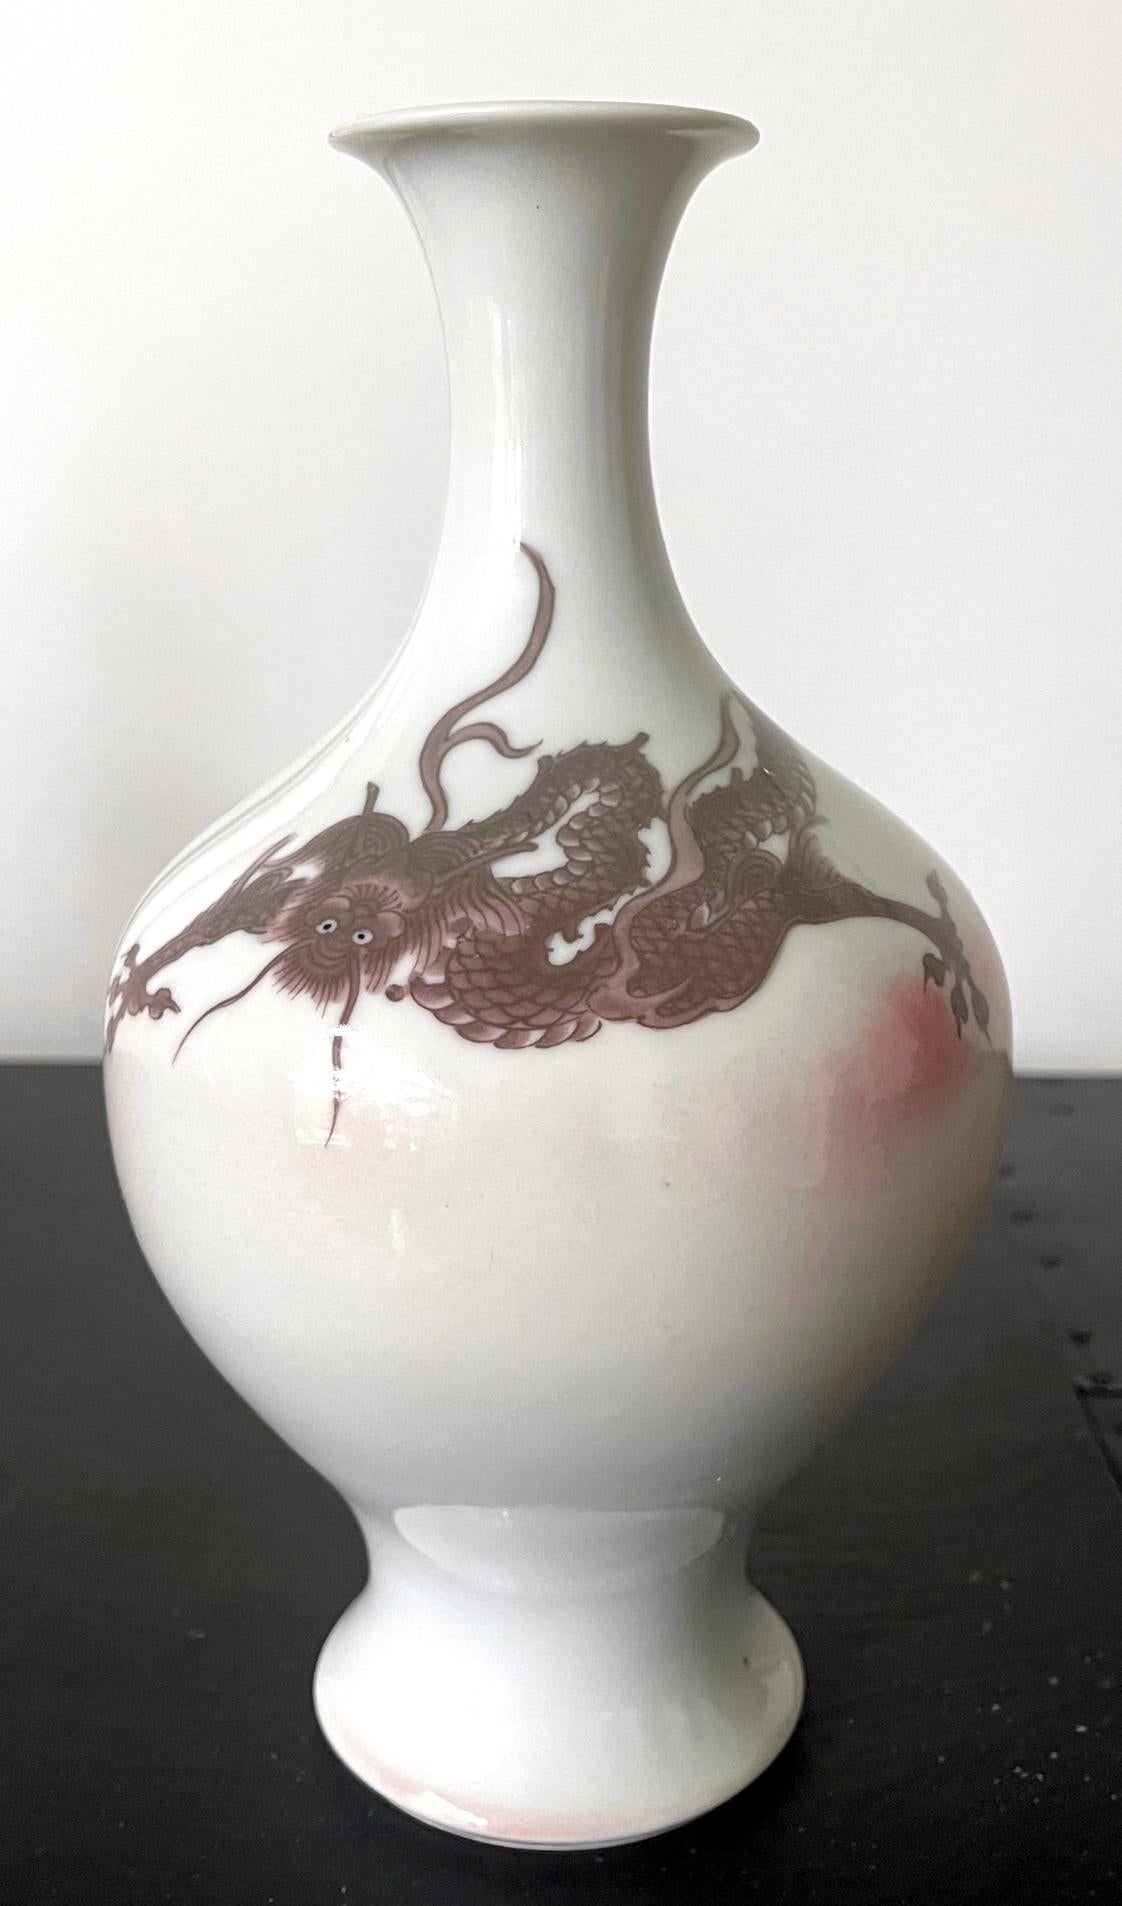 A porcelain vase with dragon design by Japanese imperial potter Makuzu Kozan (1842-1916), circa 1900s. The vase is made in what is considered early phase of his underglaze period during late Meiji era. In a classic baluster form, the surface of the